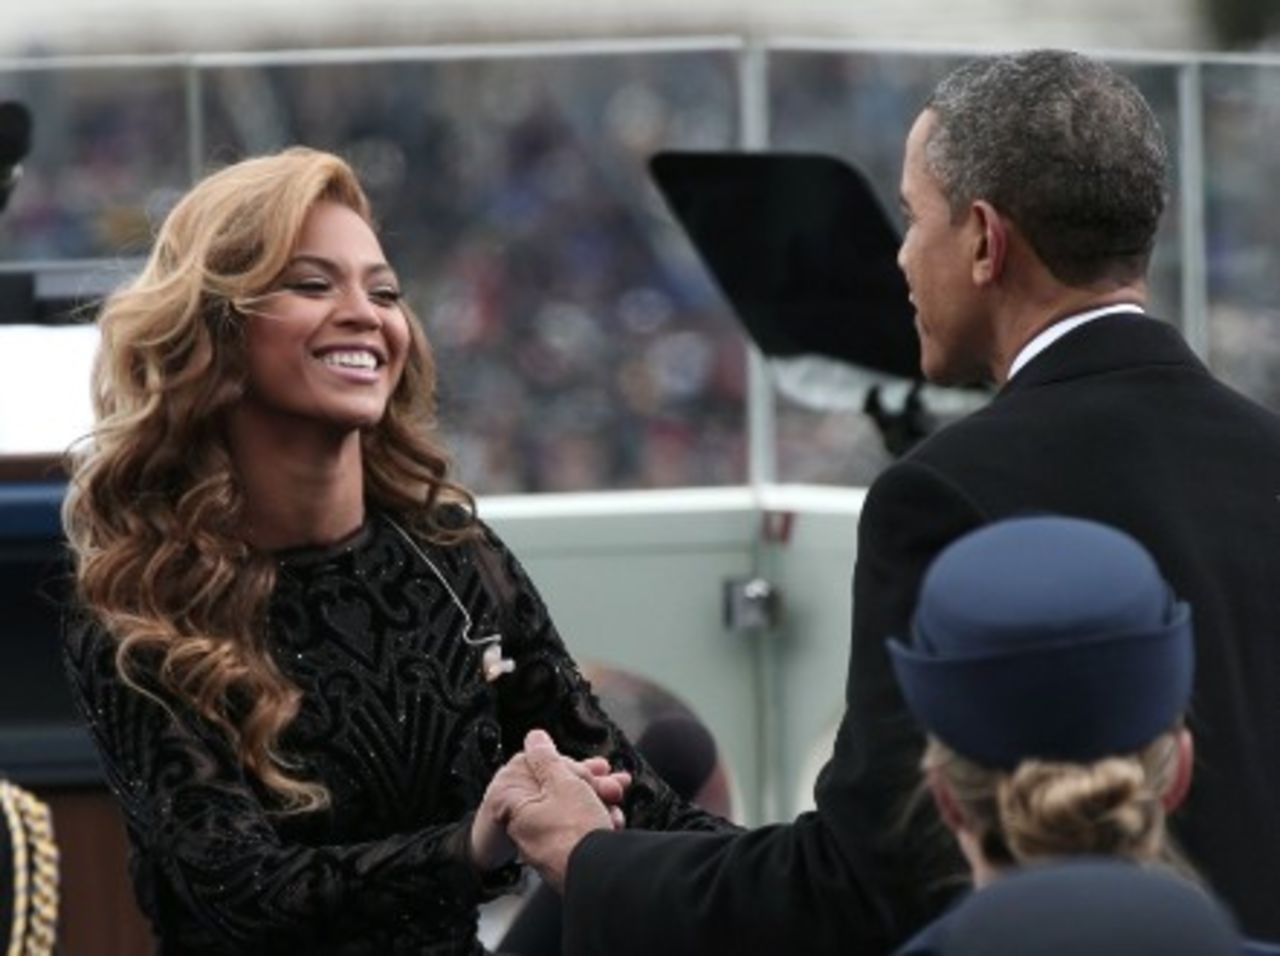 U.S. President Obama greets Beyonce after she sings at the inauguration ceremony in January 2013.